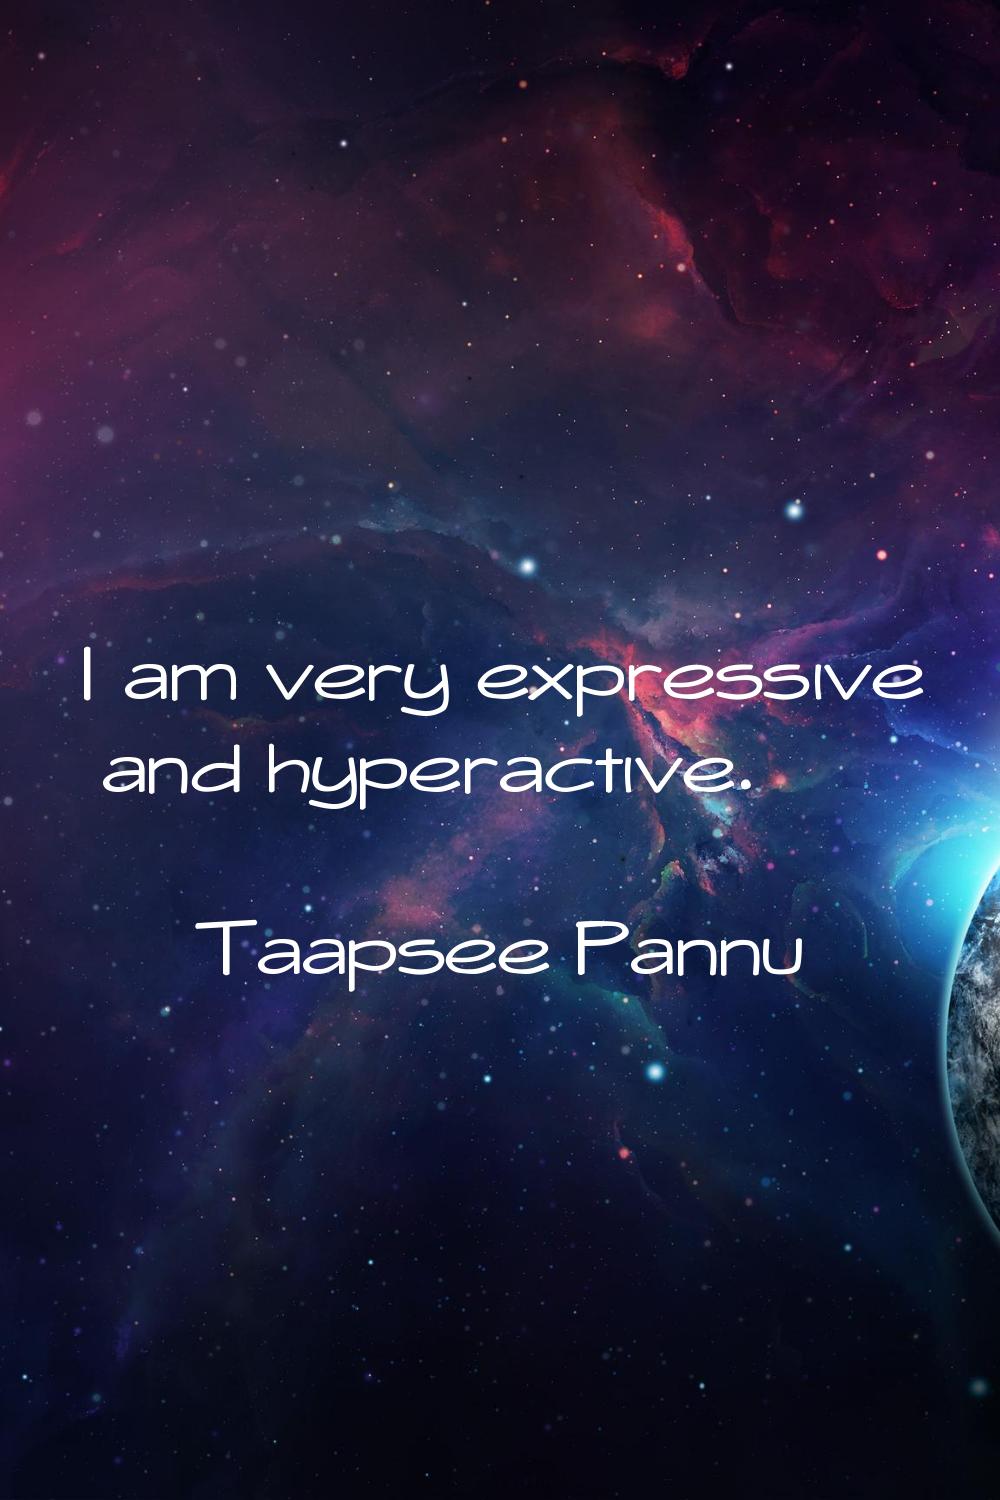 I am very expressive and hyperactive.